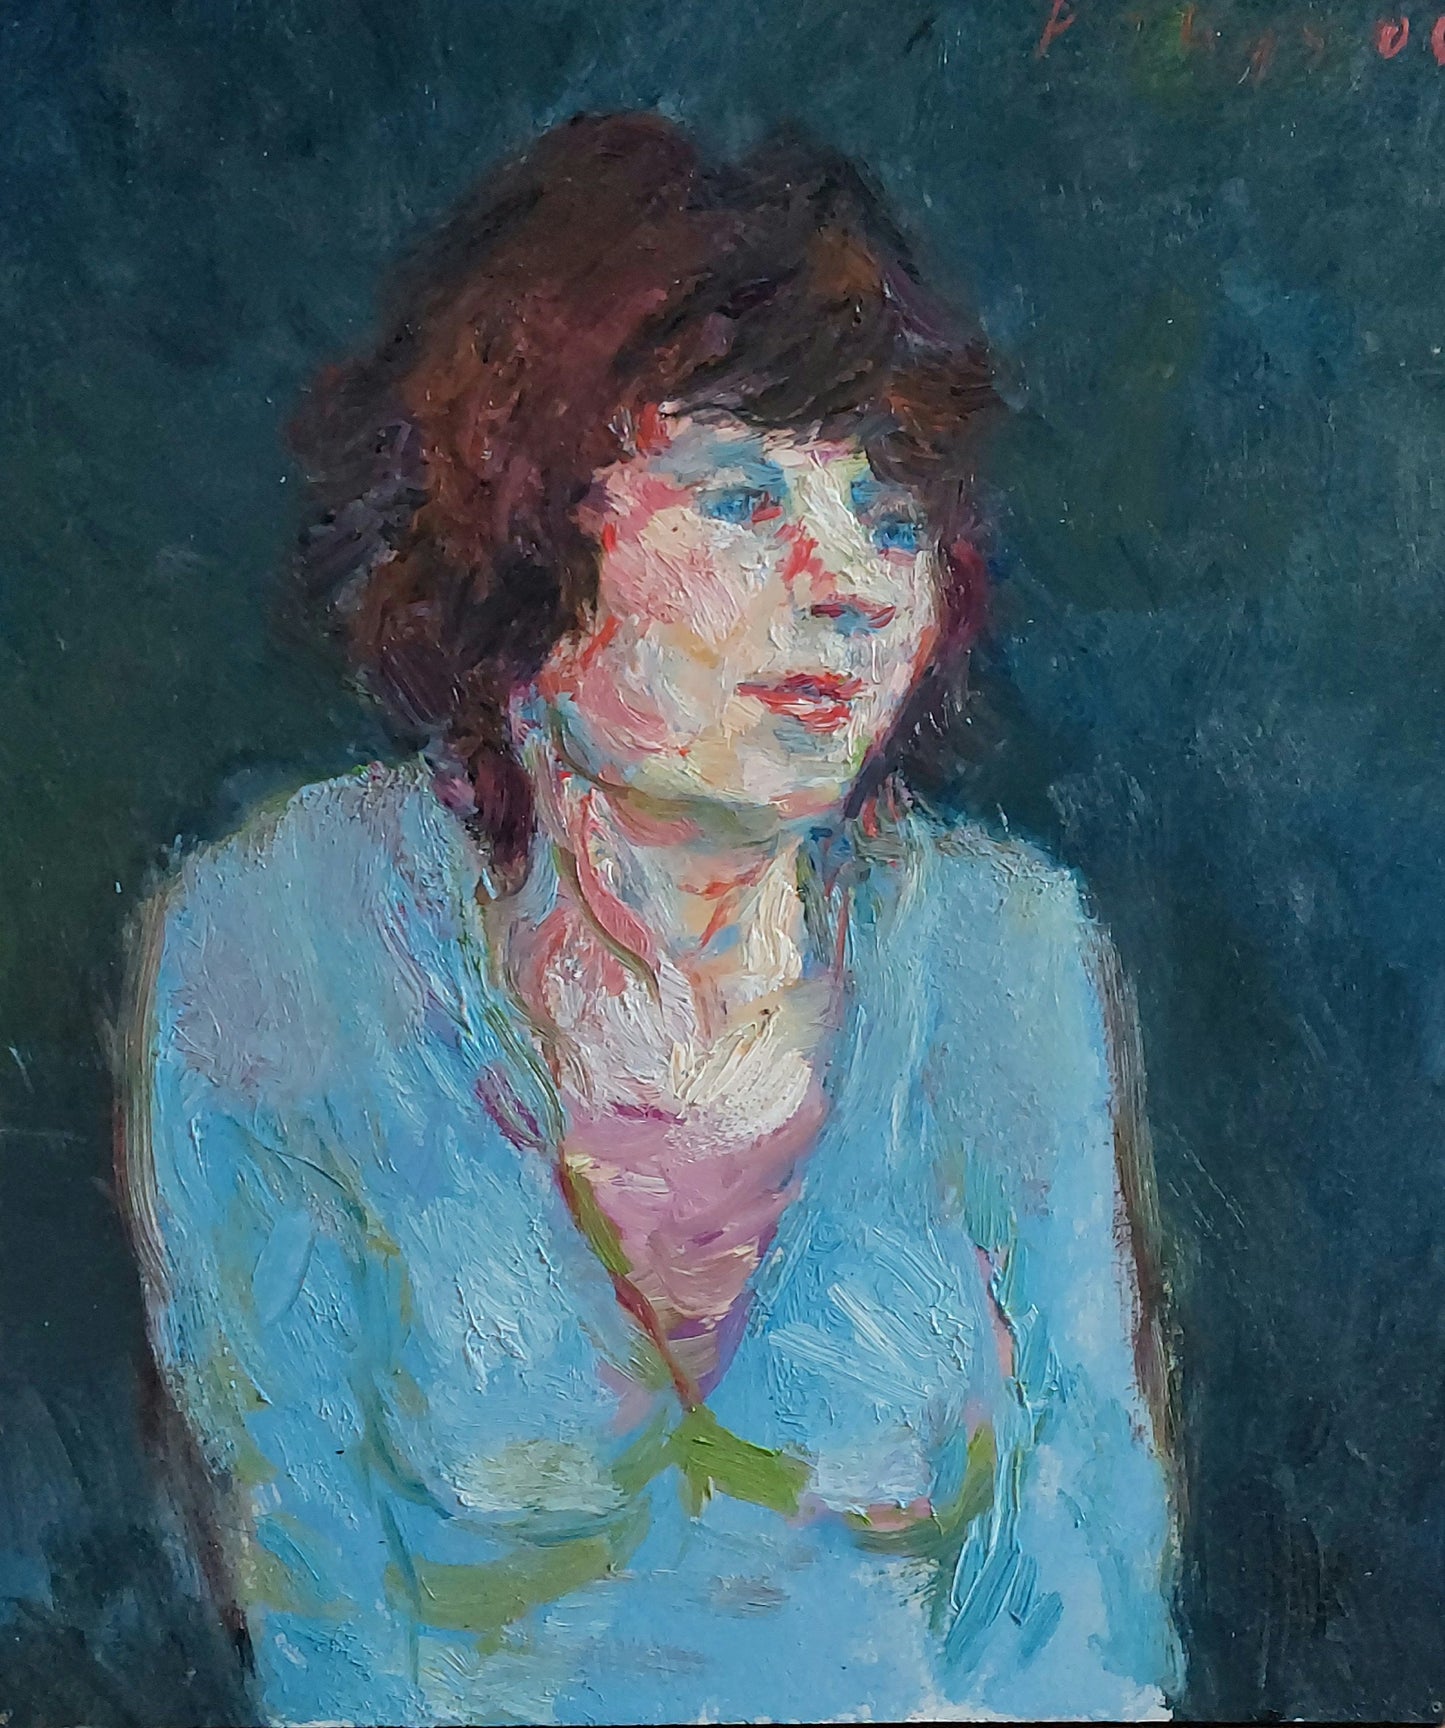 ‘Woman with blue vest’ 2006 oil on board 35,5x30,5cm